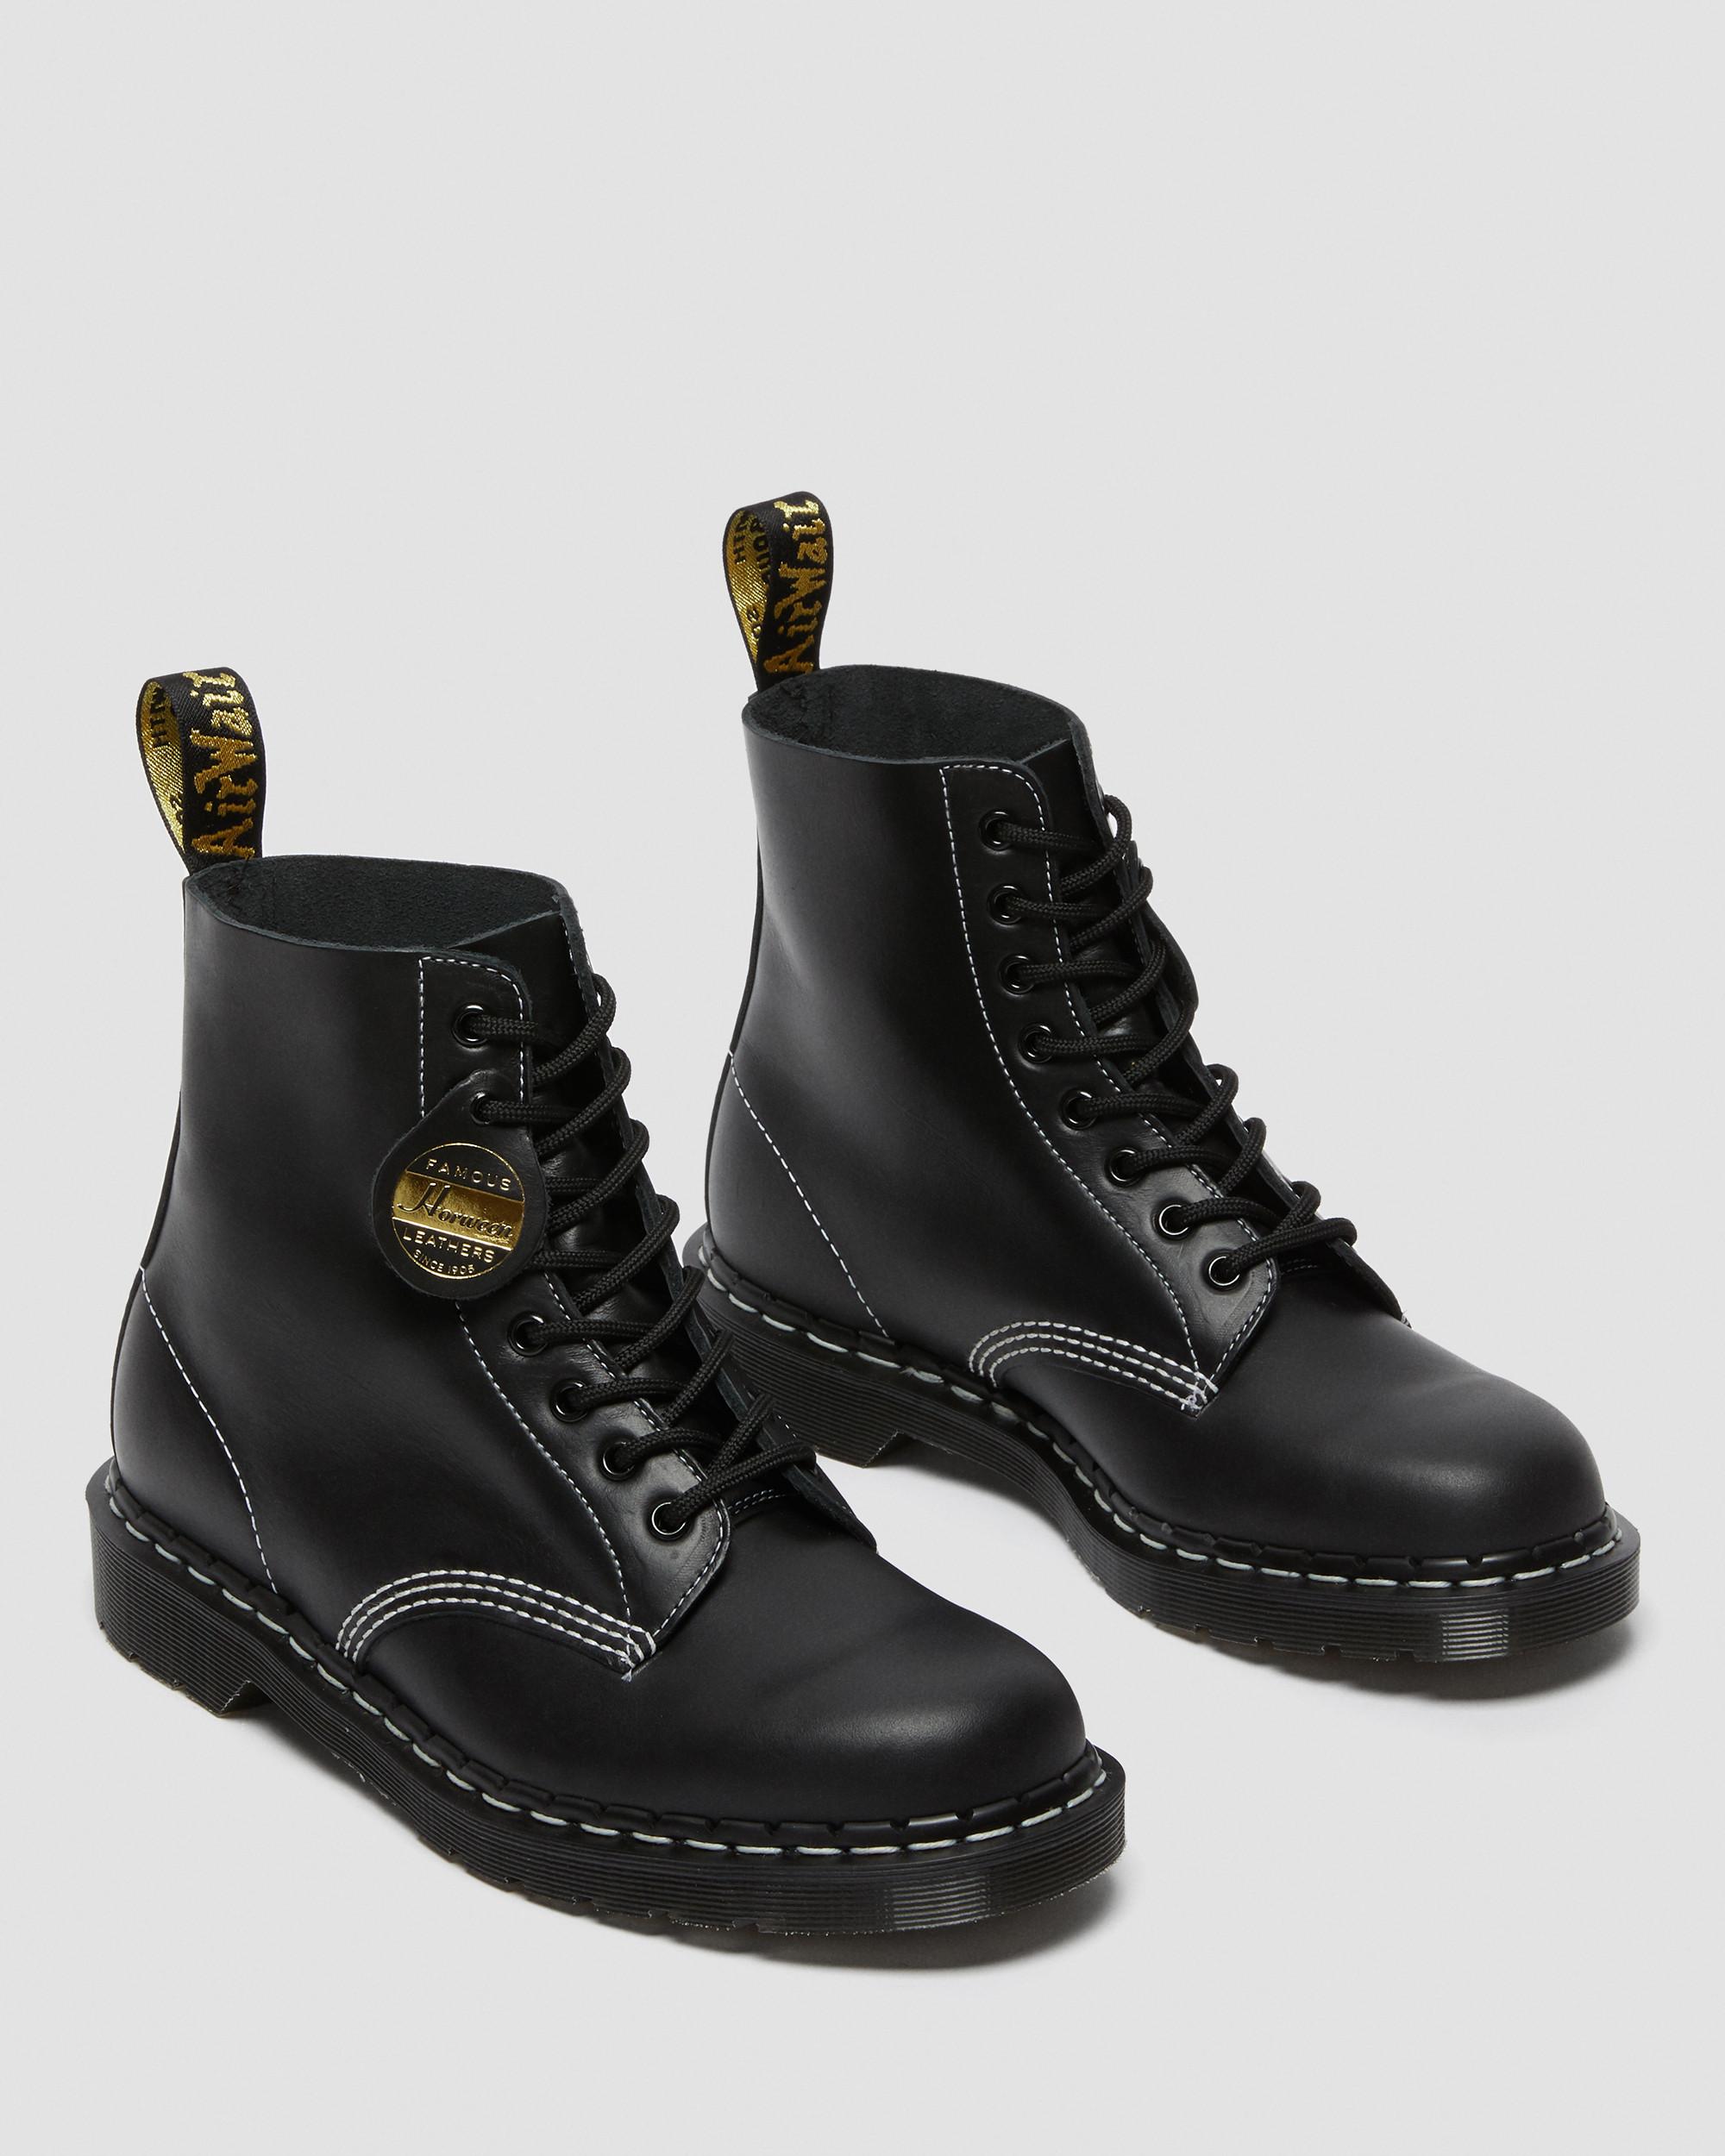 1460 Pascal Made in England Cavalier Leather Lace Up Boots1460 Pascal Made in England Cavalier Leather Lace Up Boots Dr. Martens